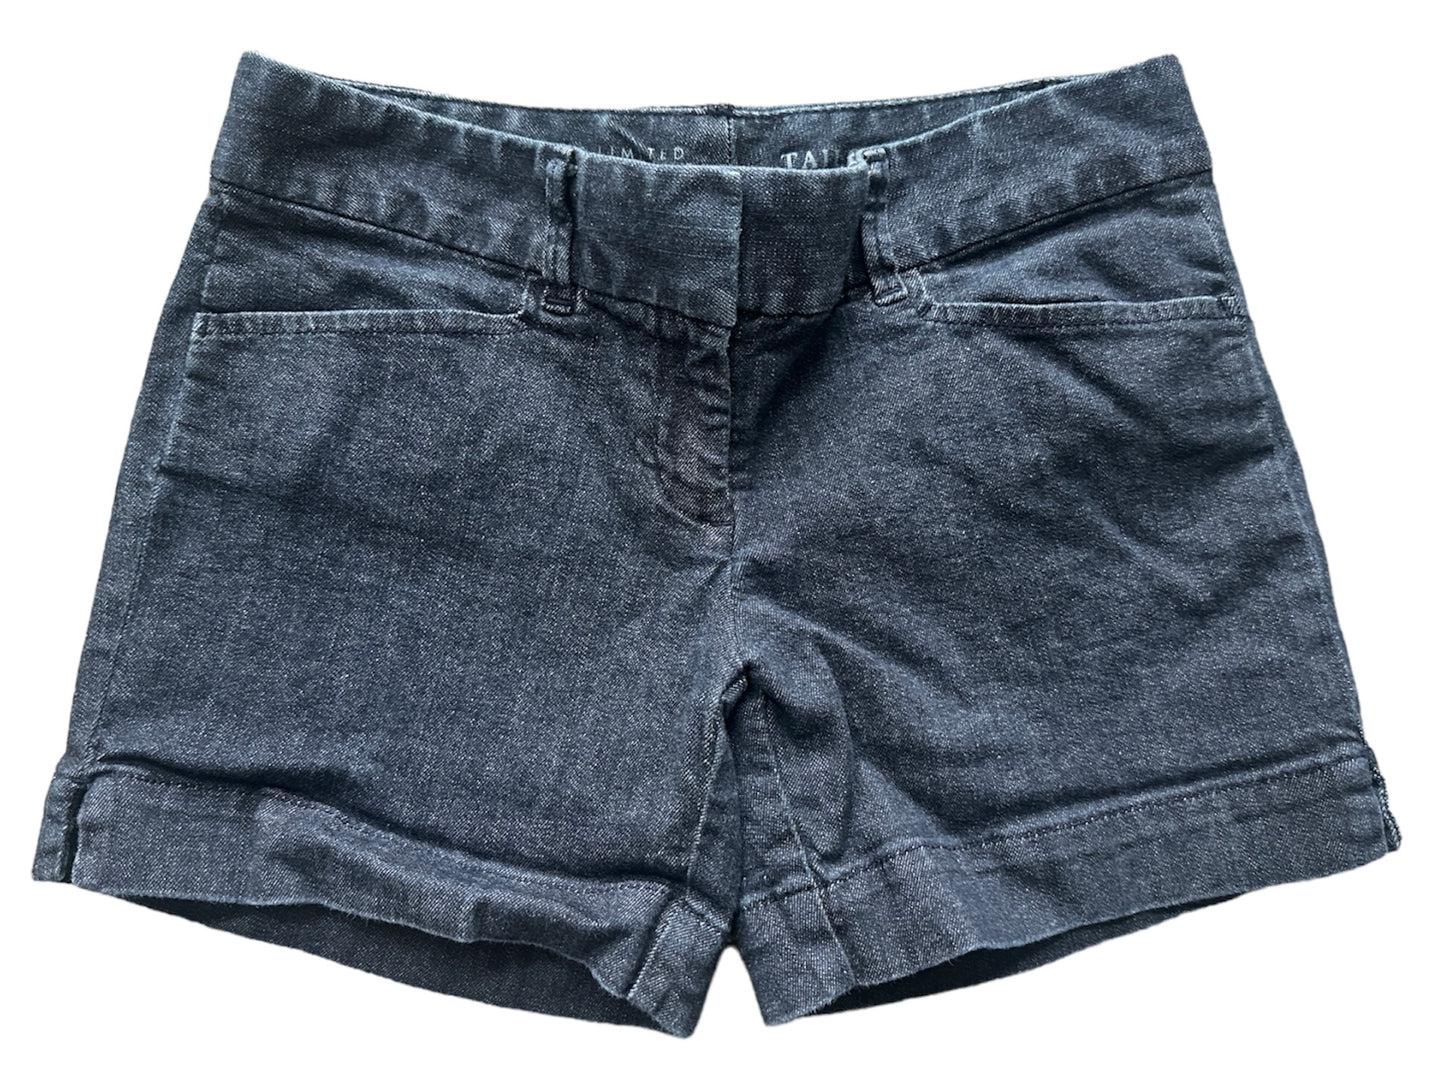 Women’s The Limited denim shorts size 0R